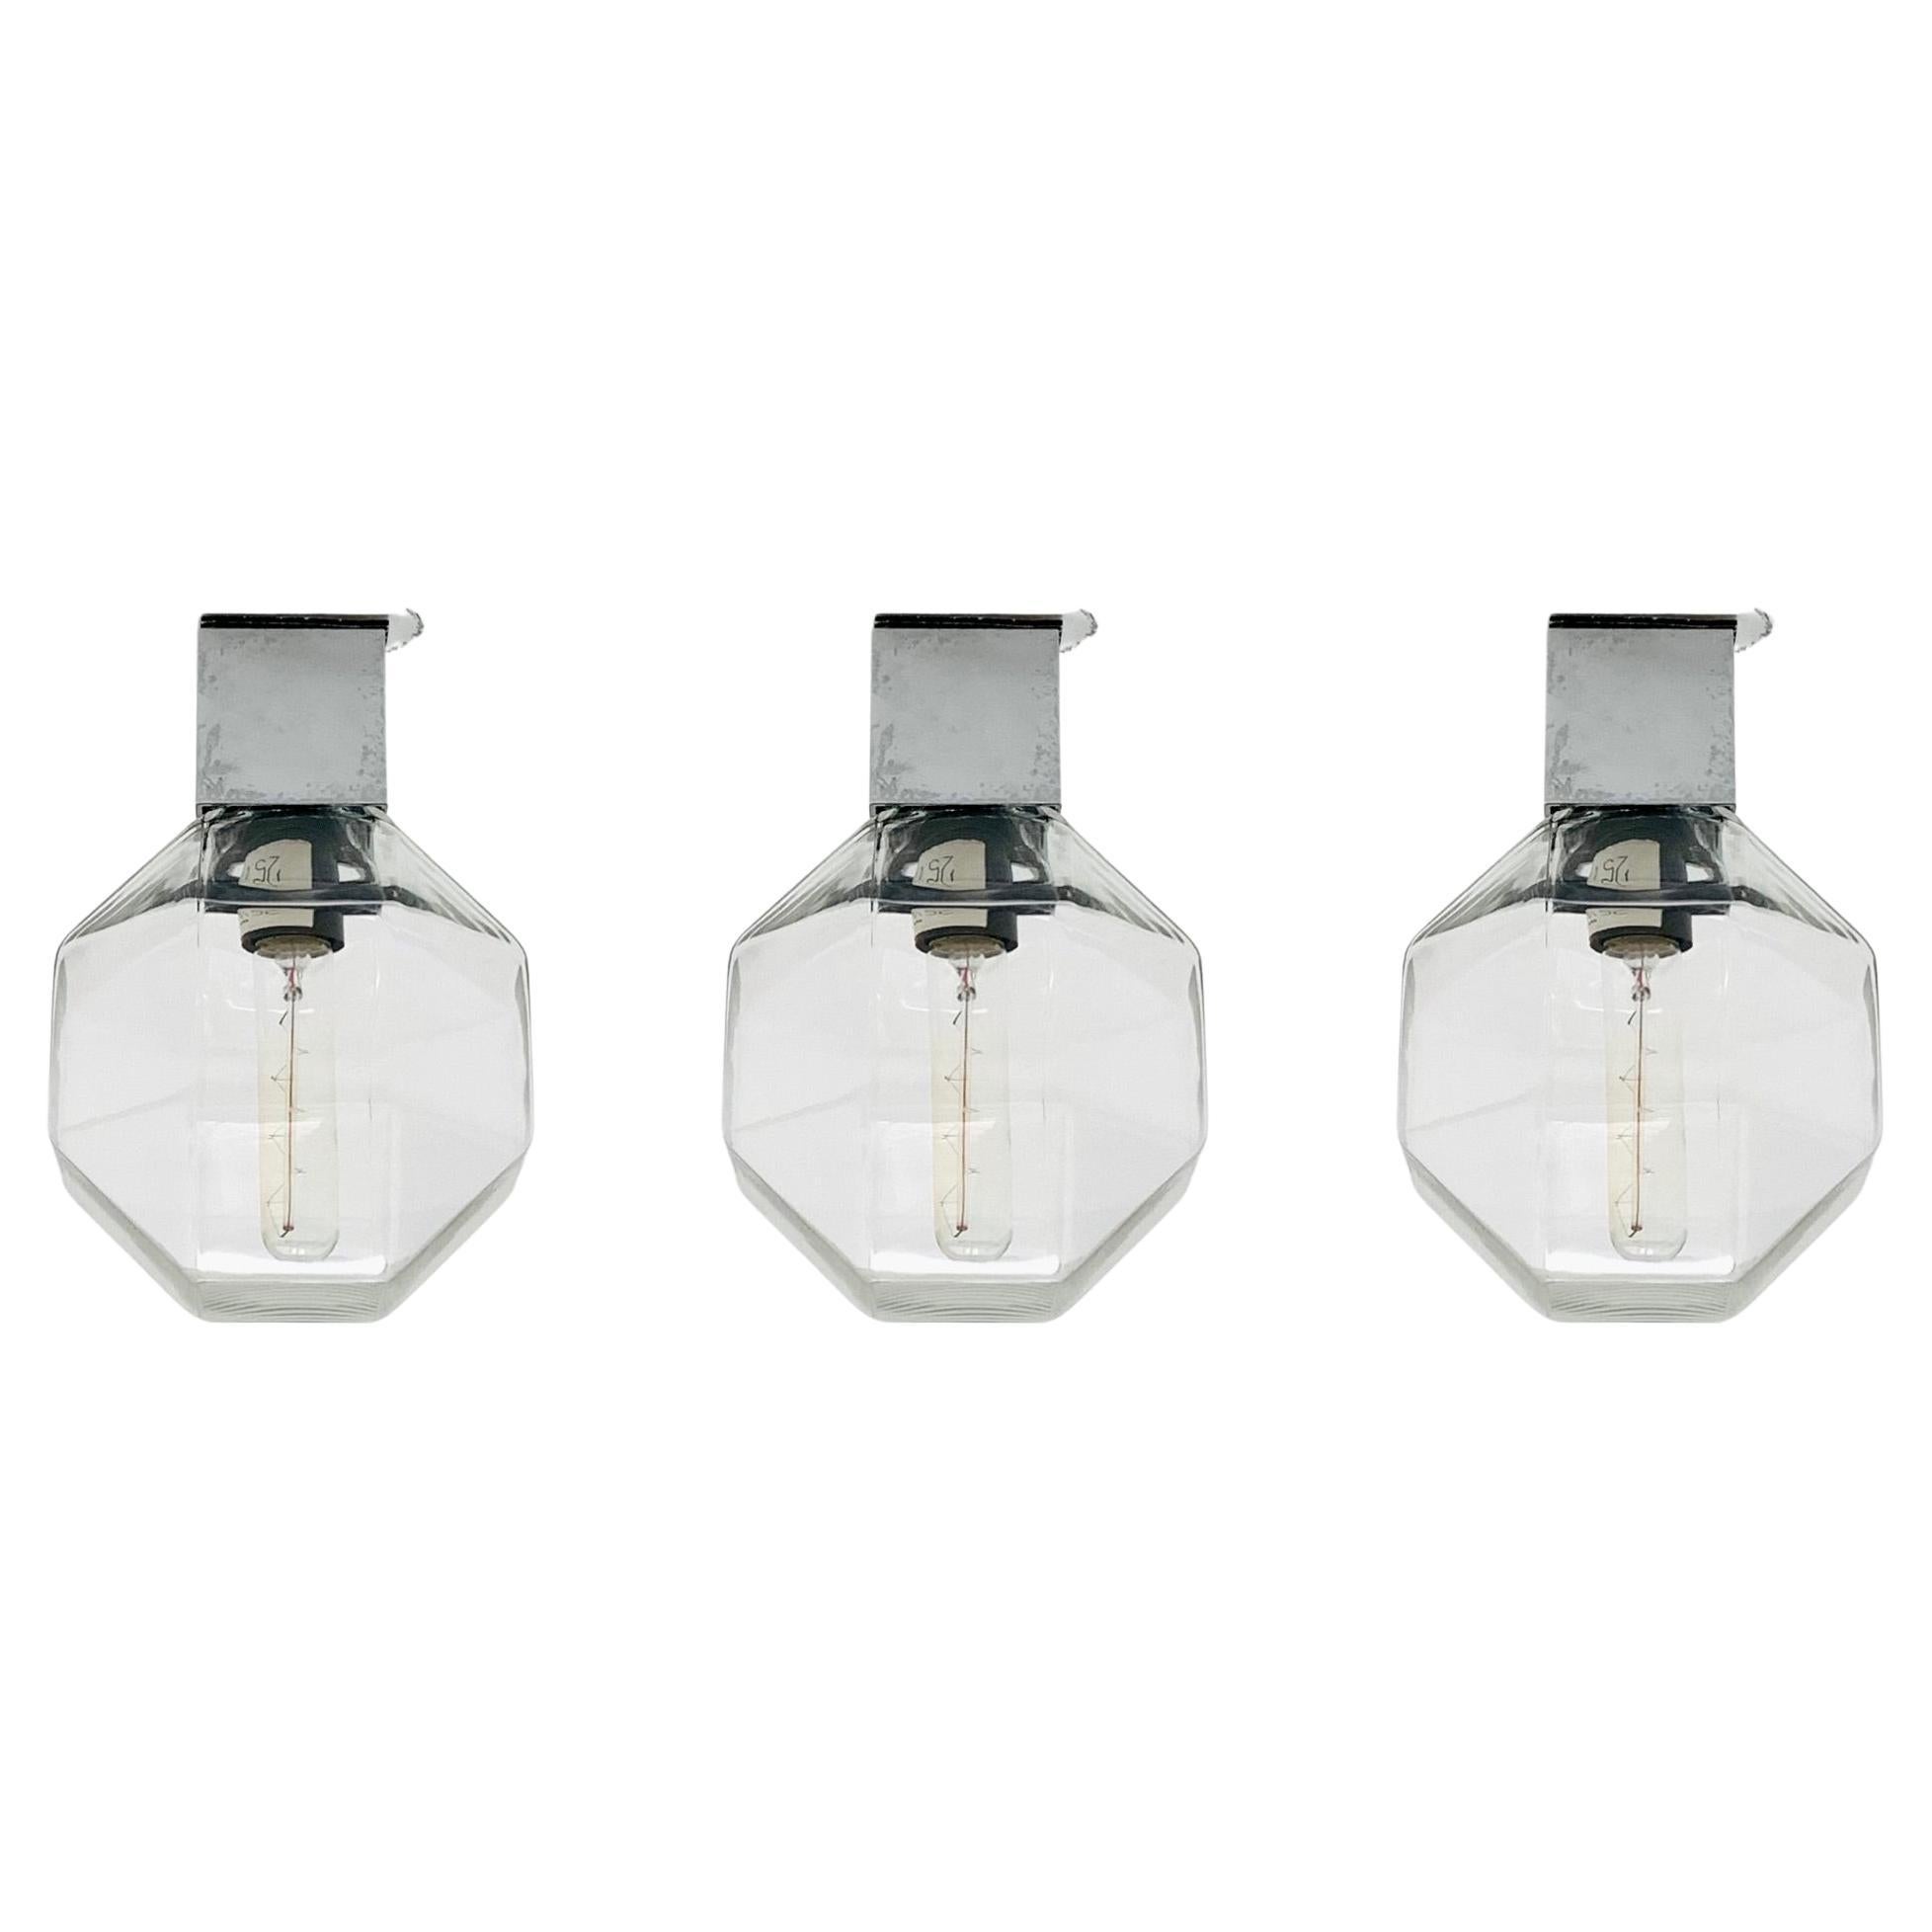 Set of 3 1970s Modernist Wall or Ceiling Lamps by Motoko Ishii for Staff For Sale